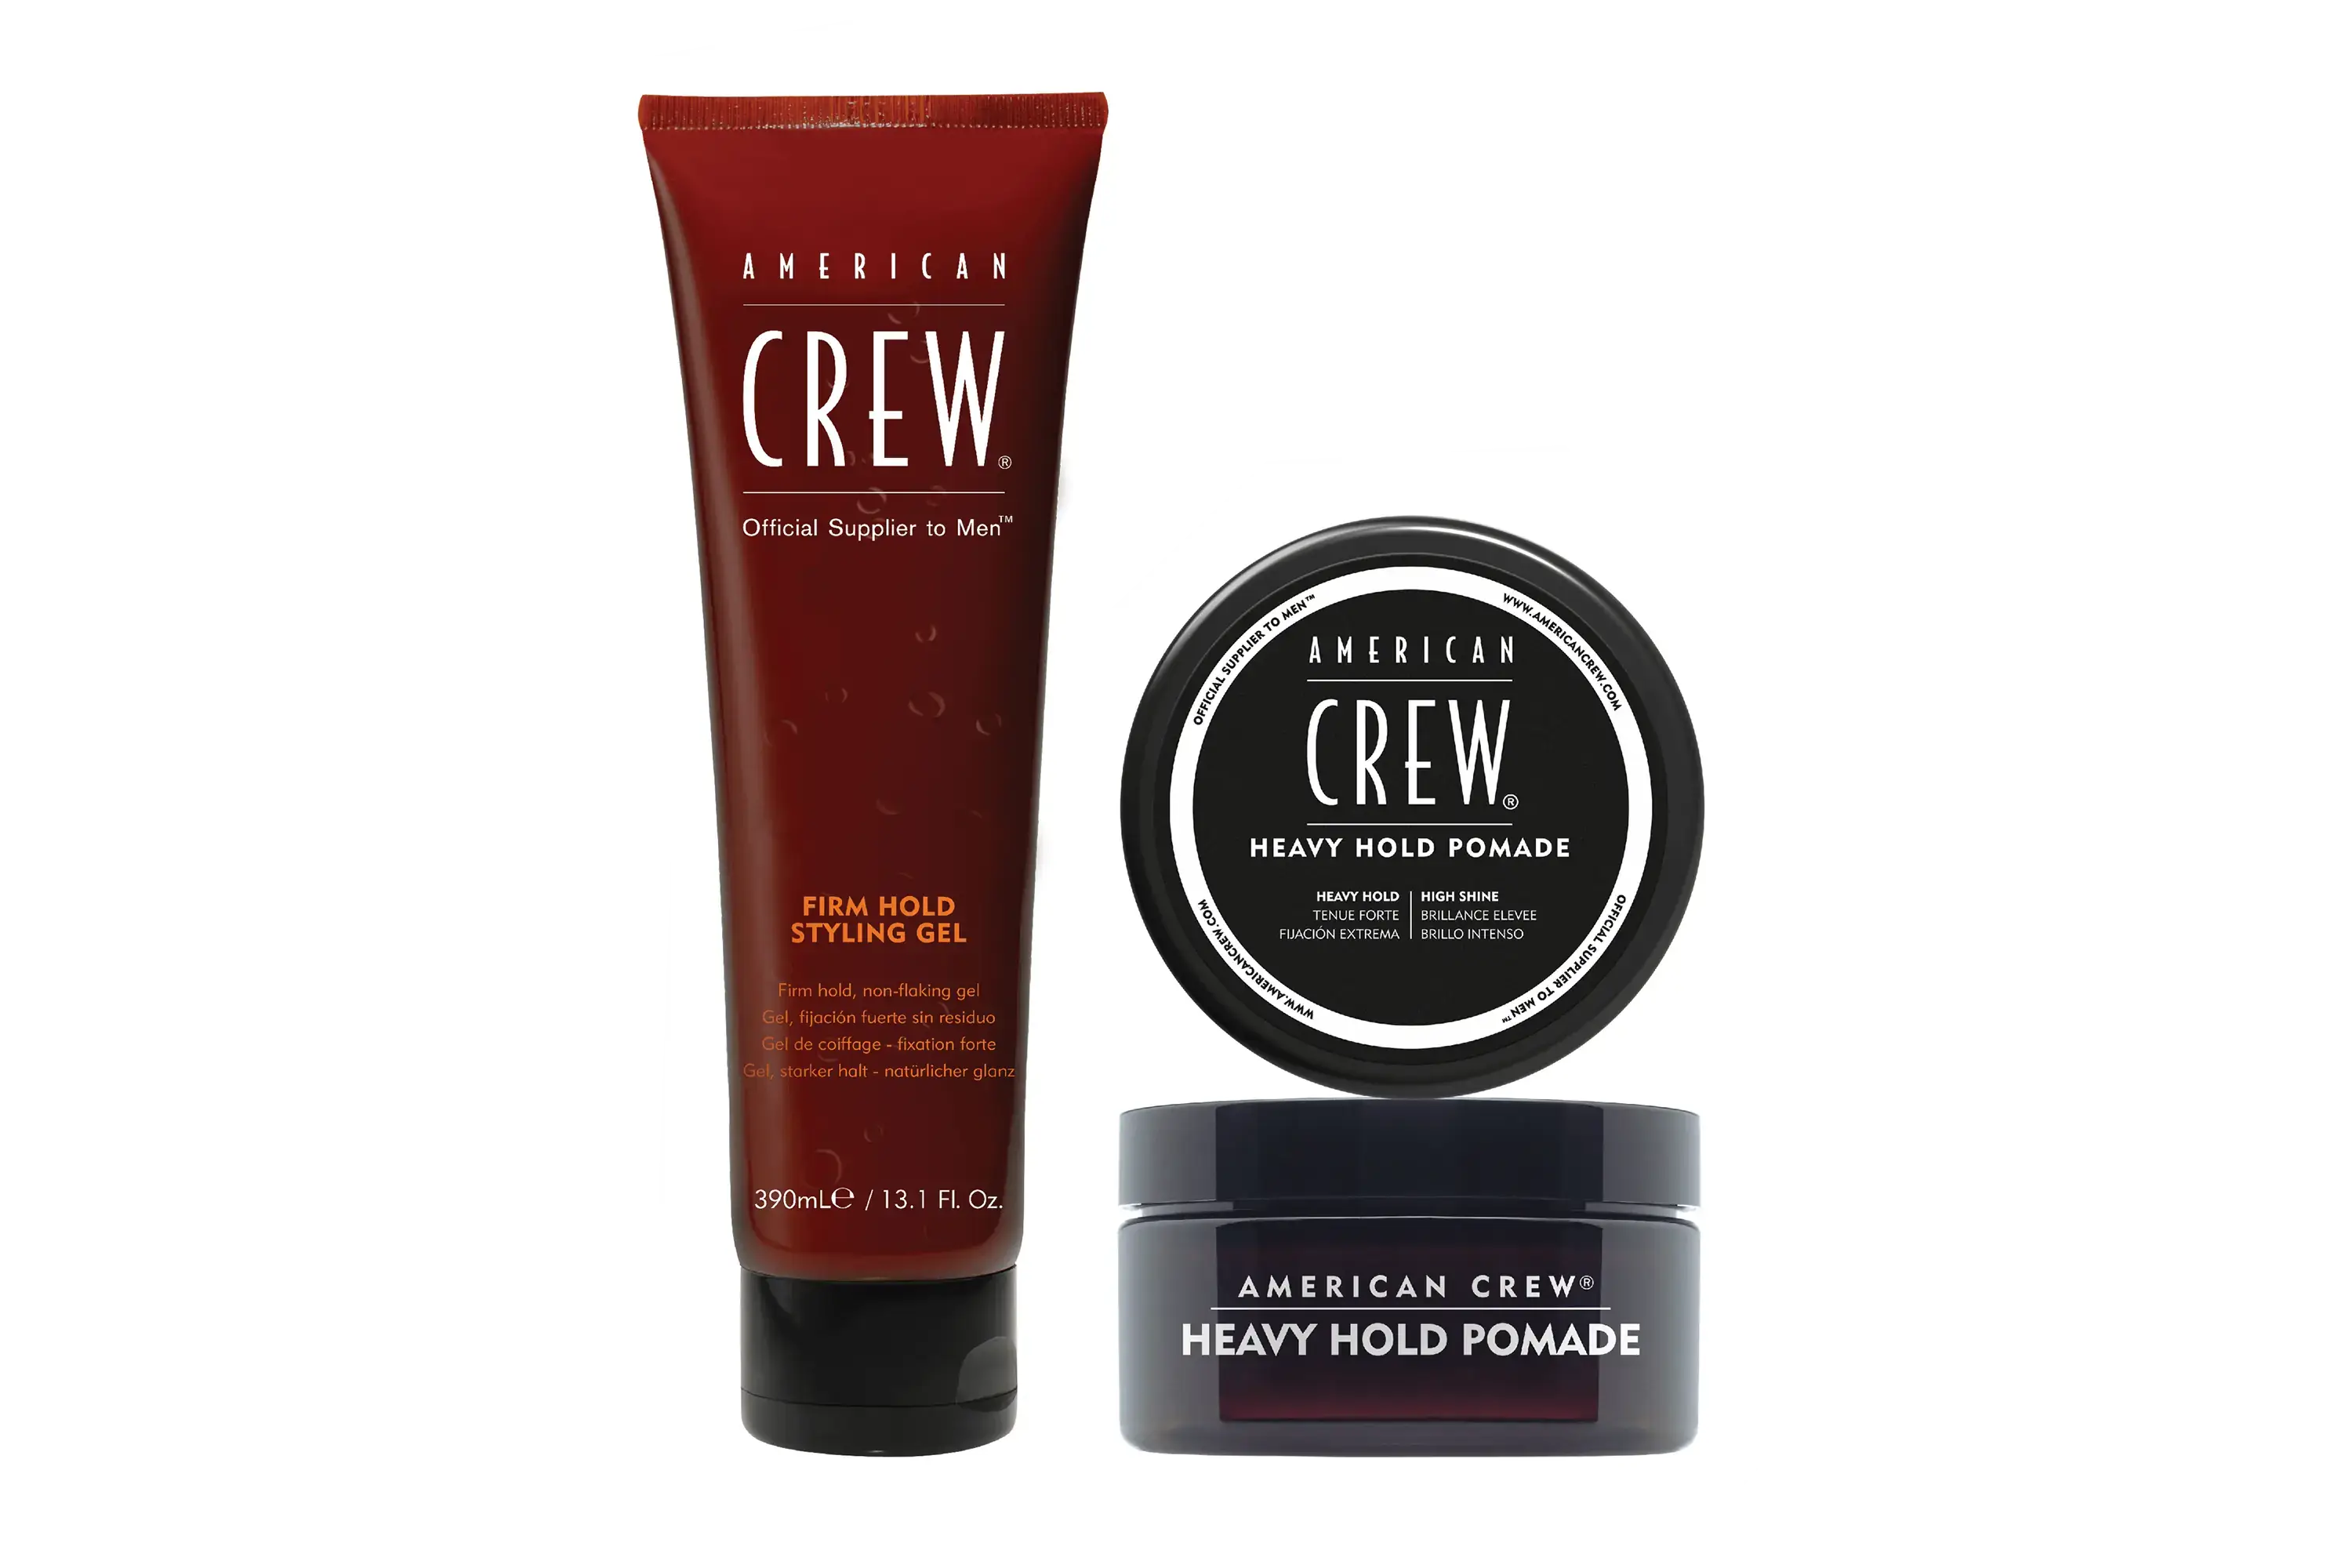 High Hold Hair Styling Products from American Crew